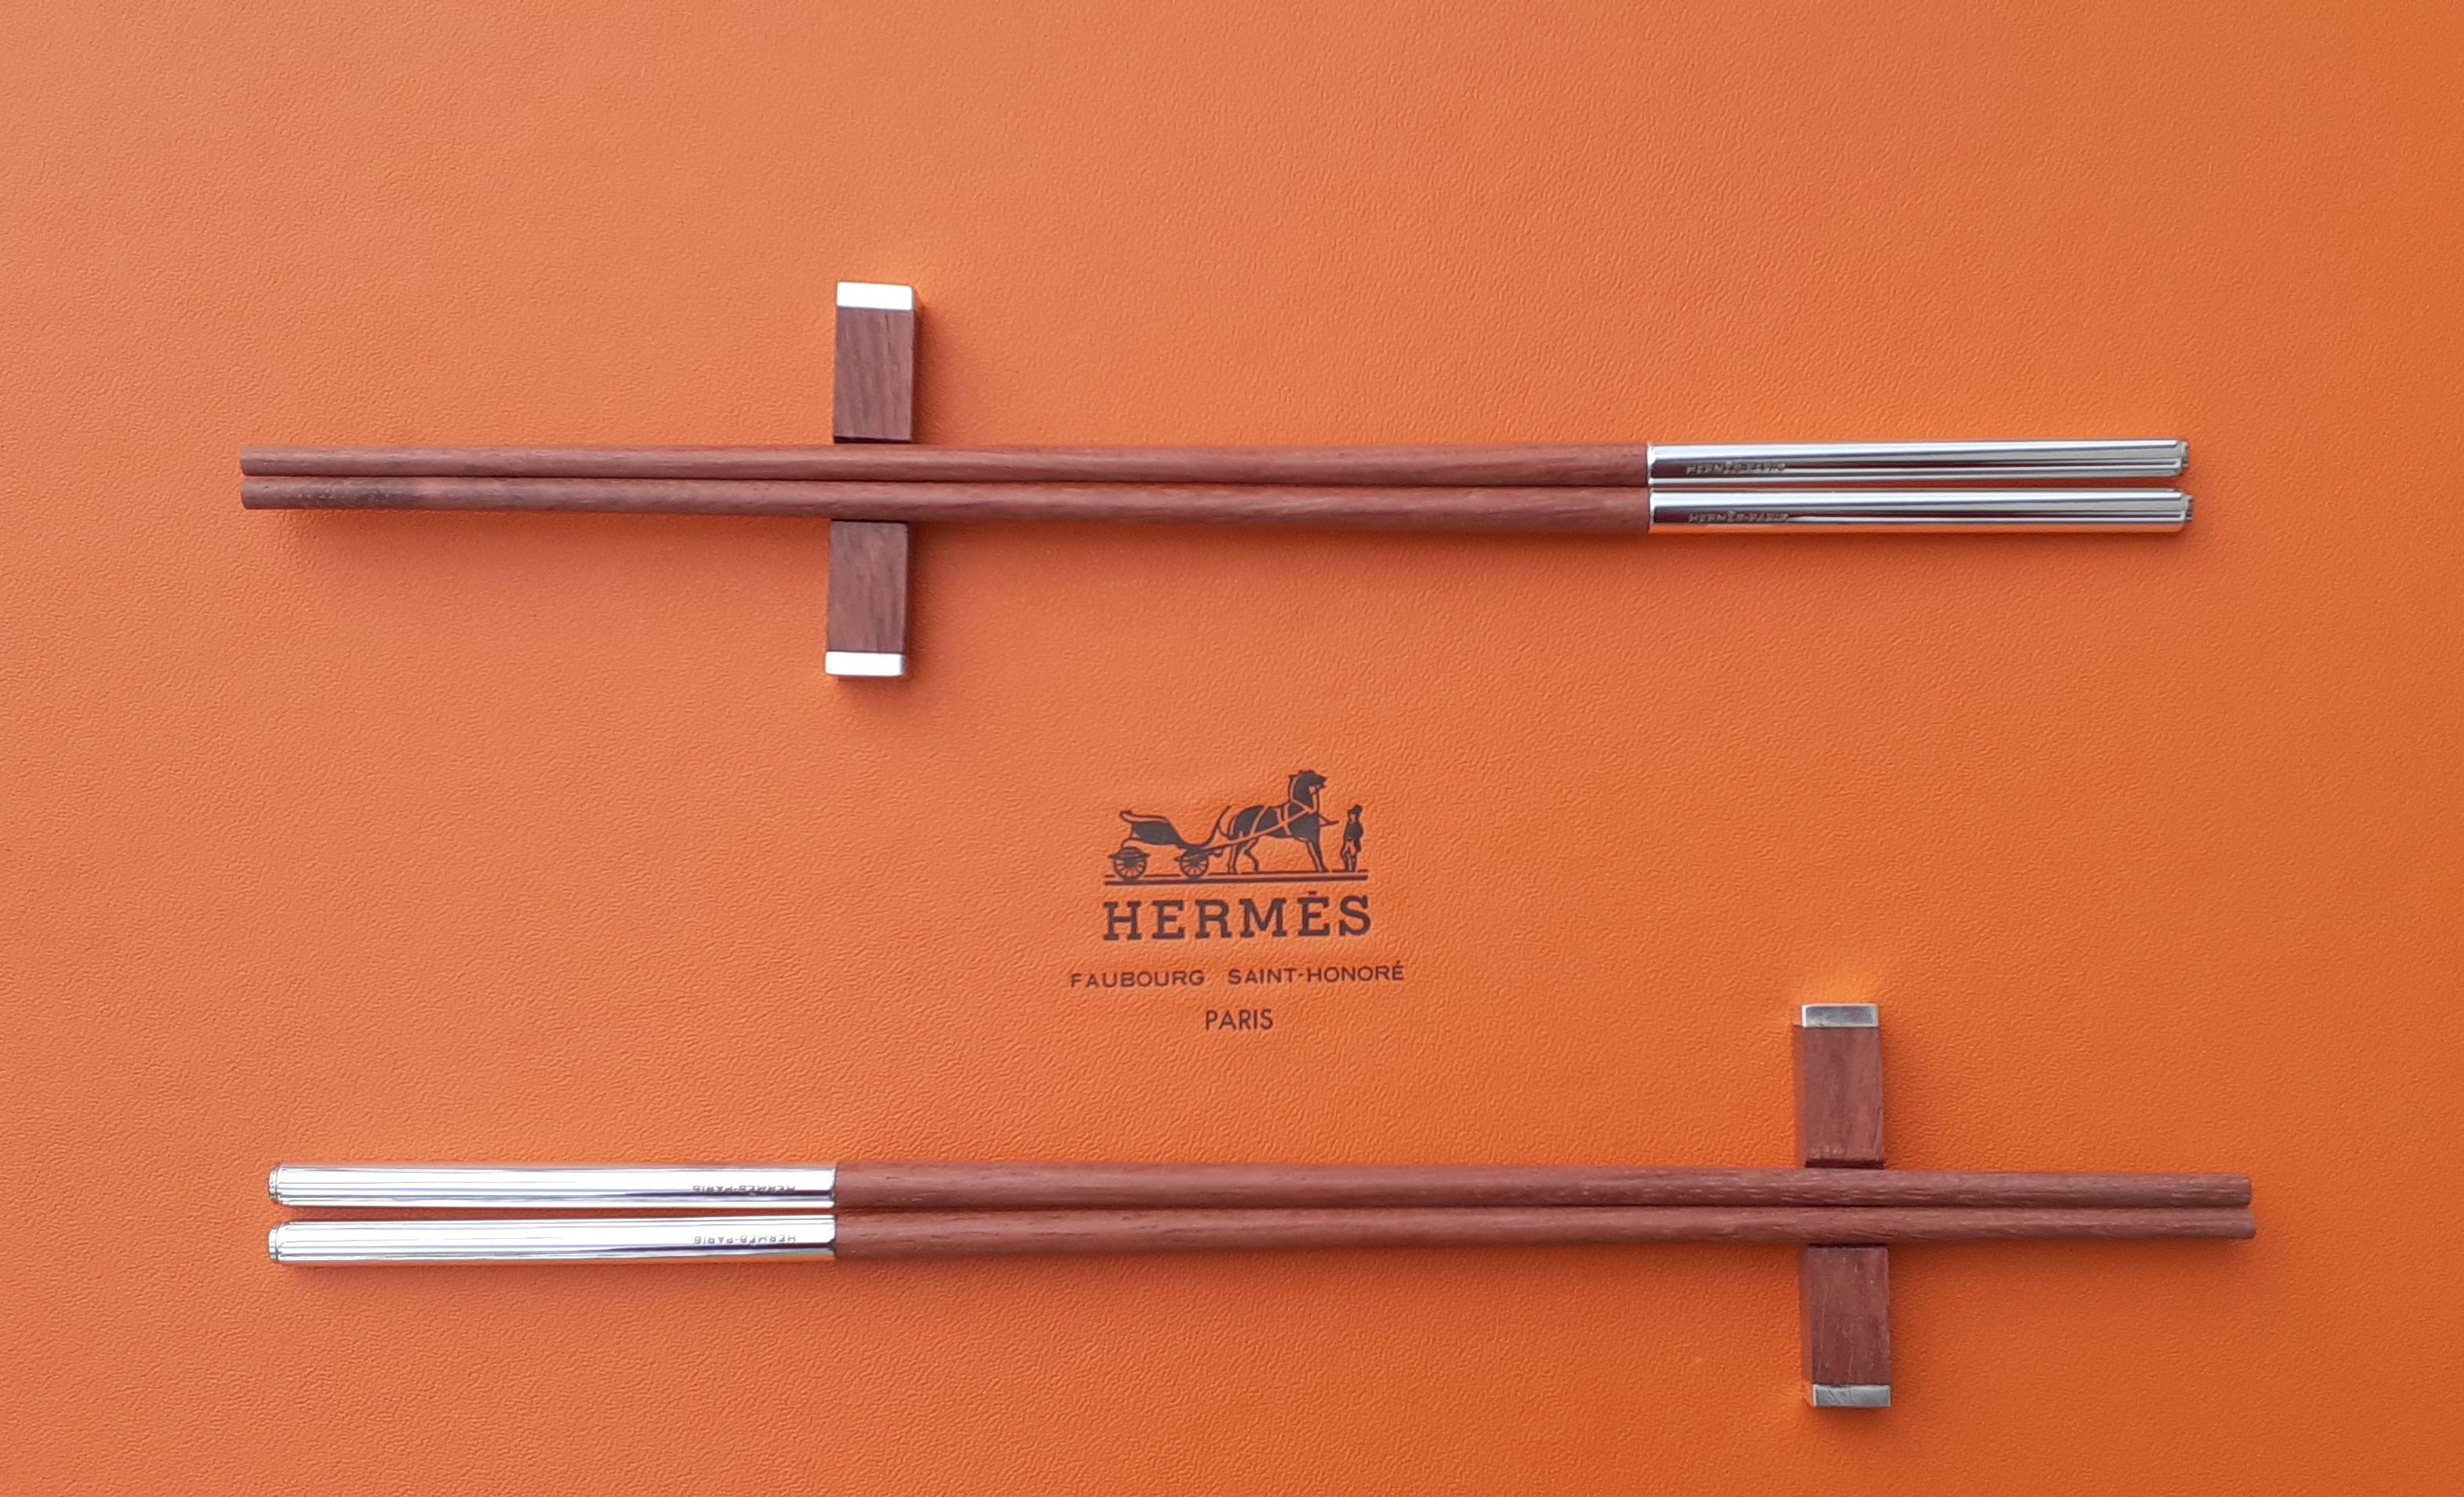 Exceptional Hermès Set of 2 pairs of Chopsticks in wood For Sale 2